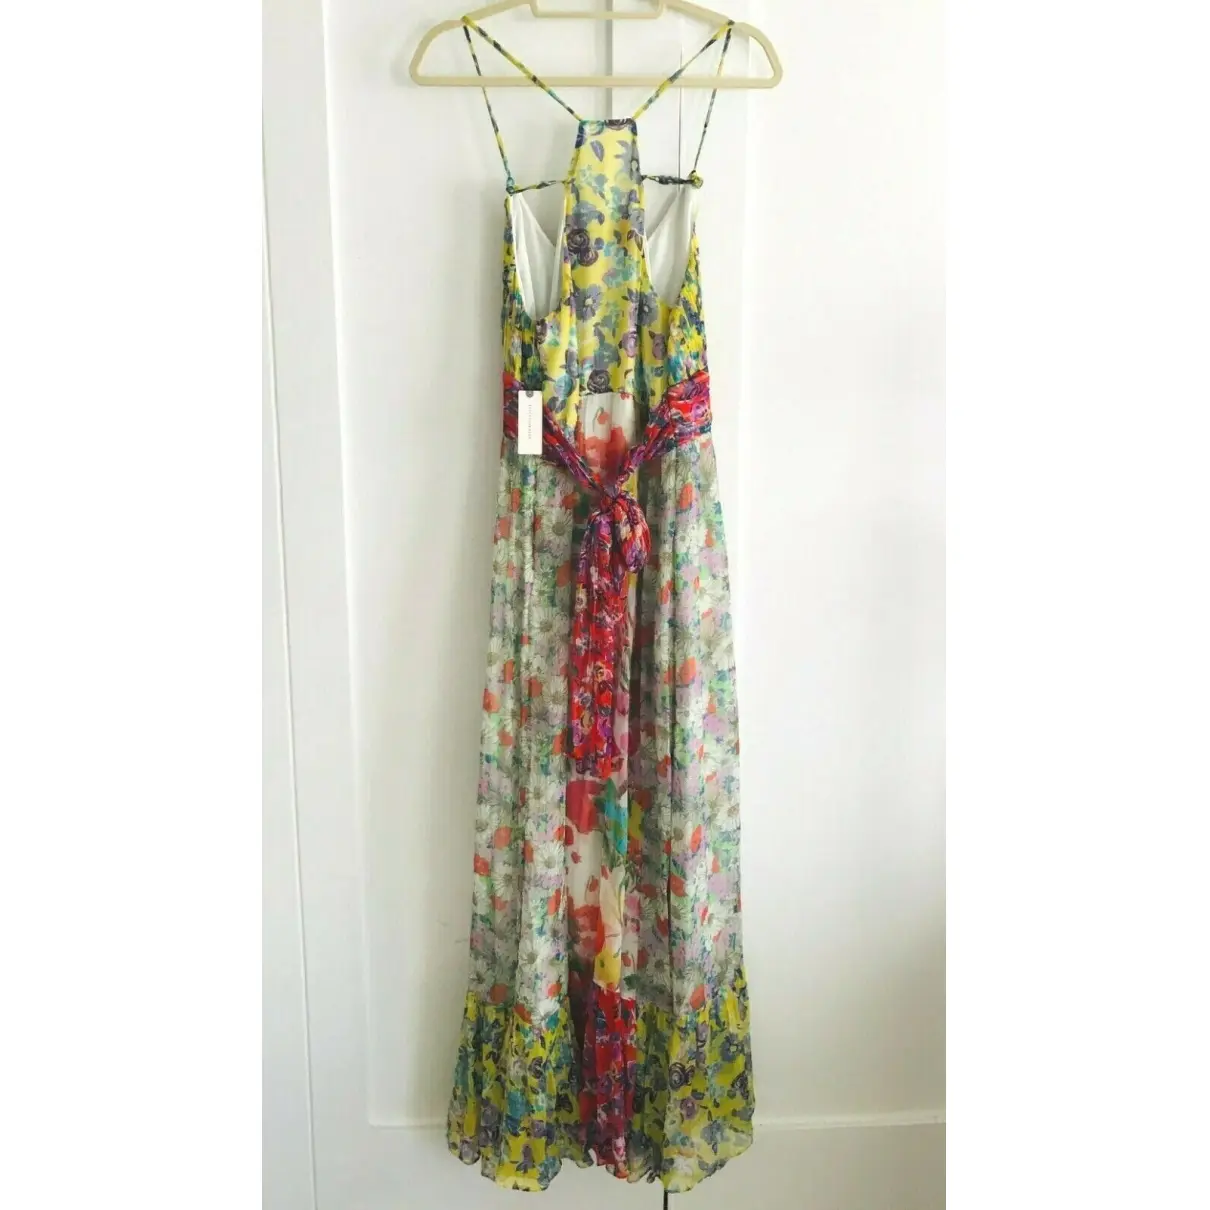 Anthropologie Maxi dress for sale